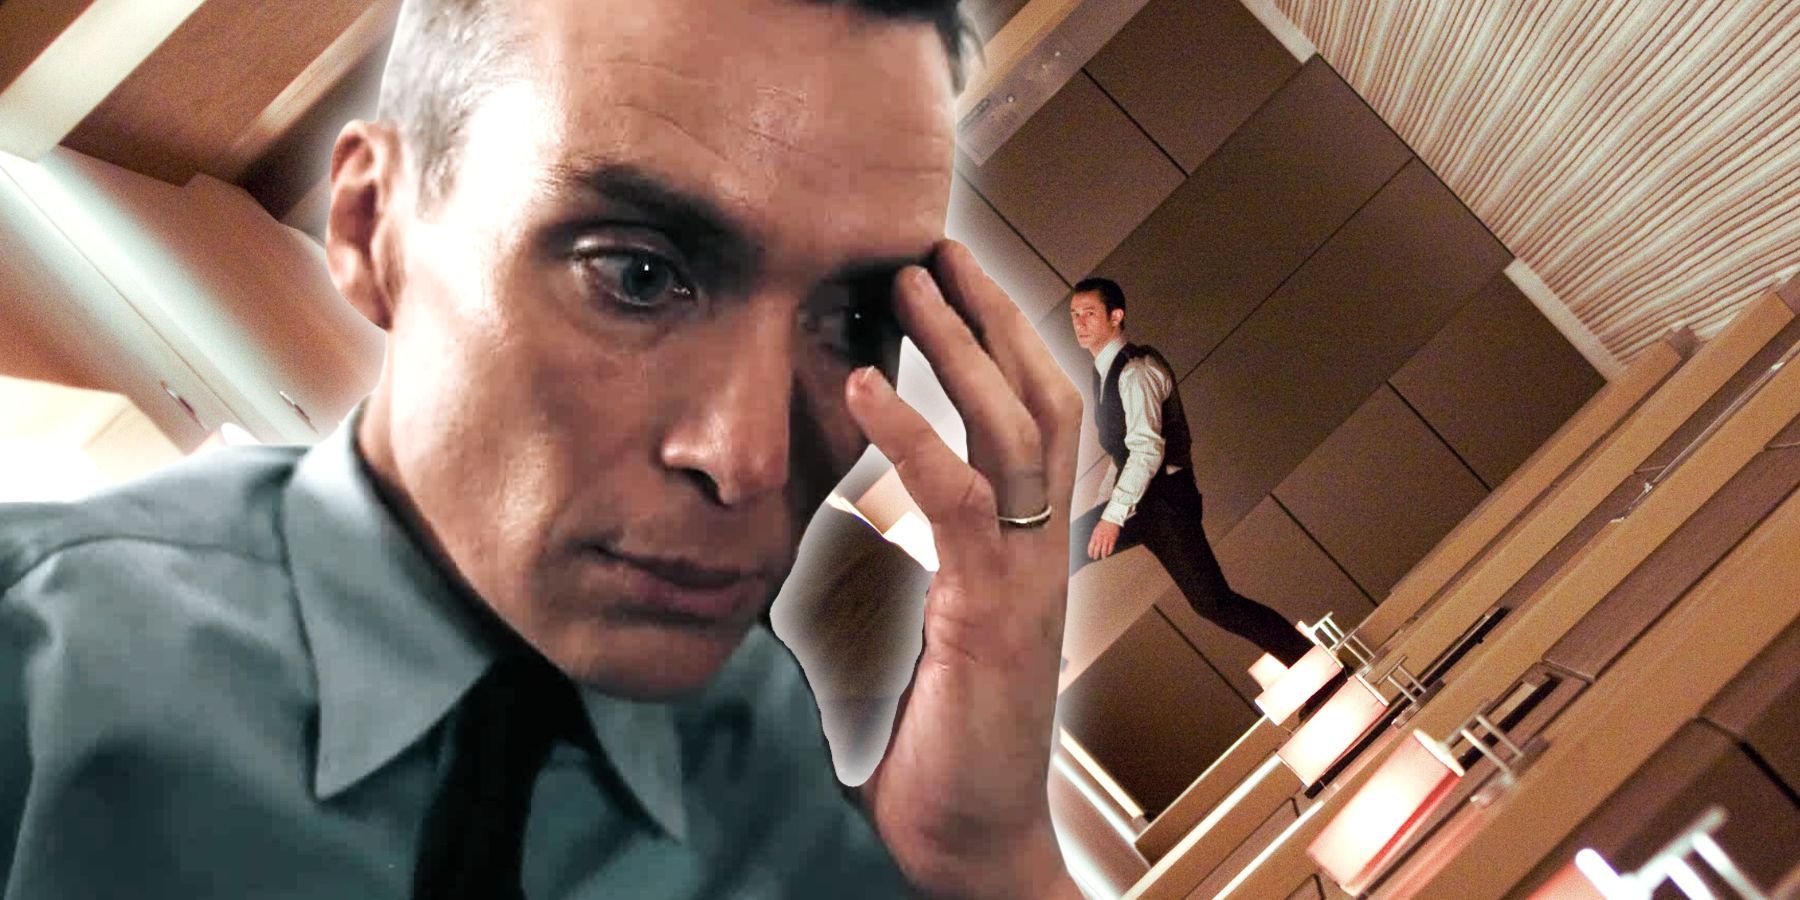 In the foreground, Cillian Murphy, as J. Robert Oppenheimer, clutches his head and looks forlorn in Christopher Nolan's Oppenheimer. Behind him, a scene from Nolan's Inception shows a character defying gravity in the dream world.